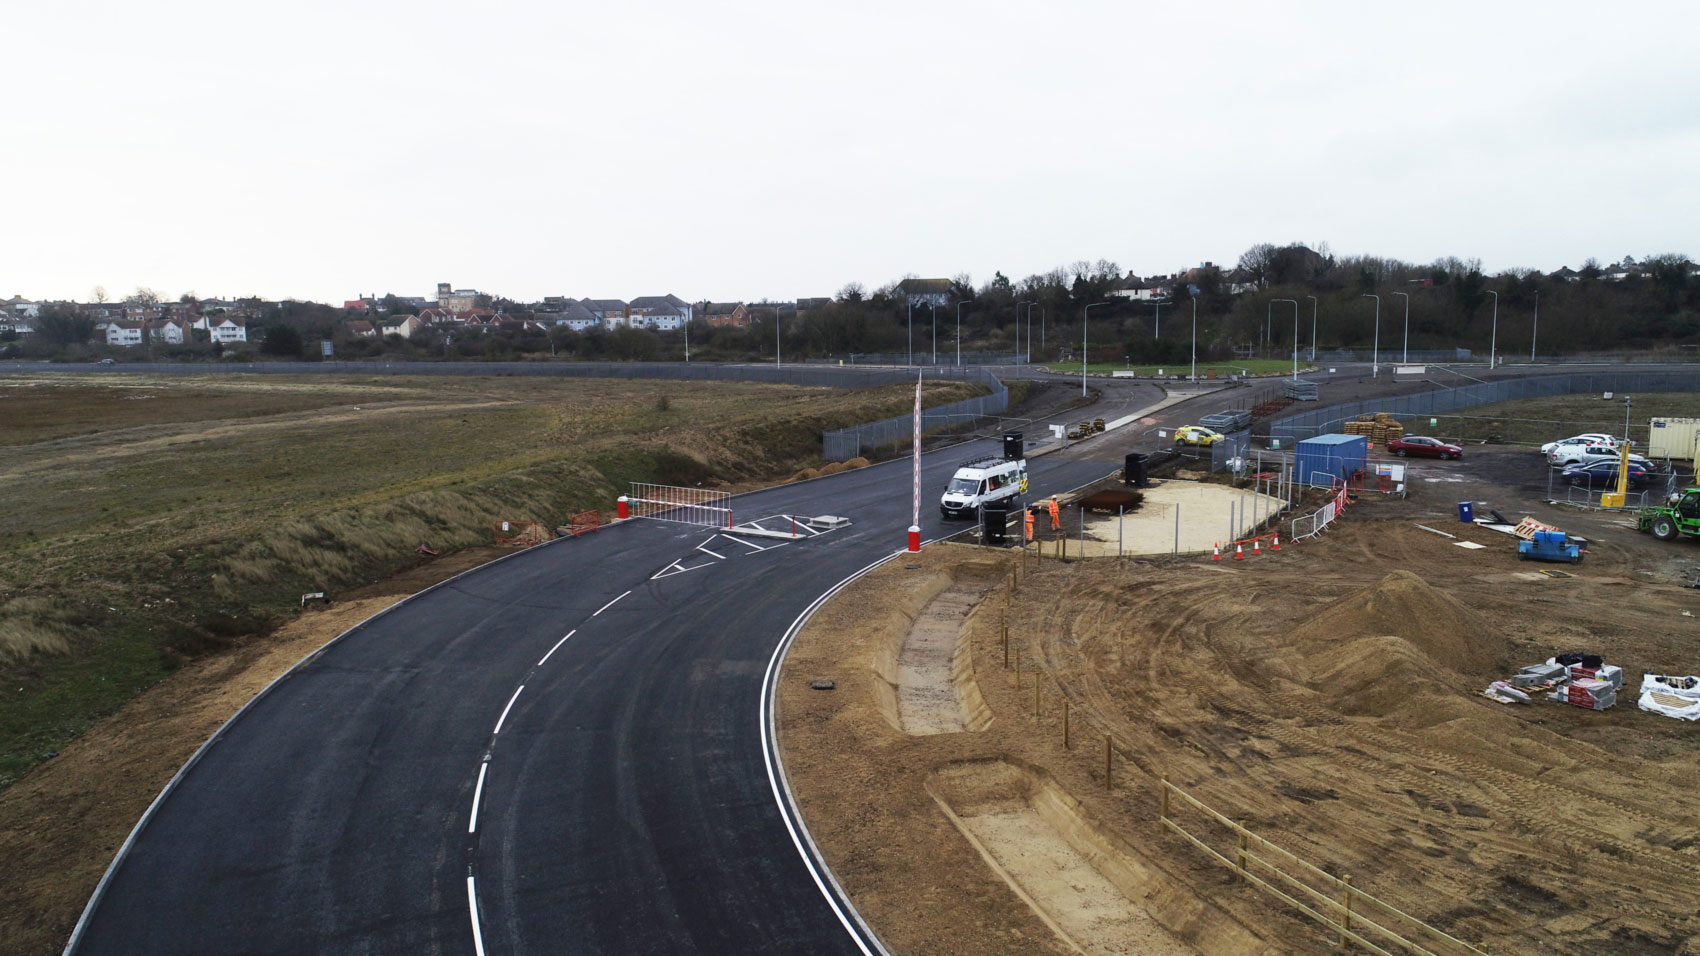 Work on new access road - March 2019